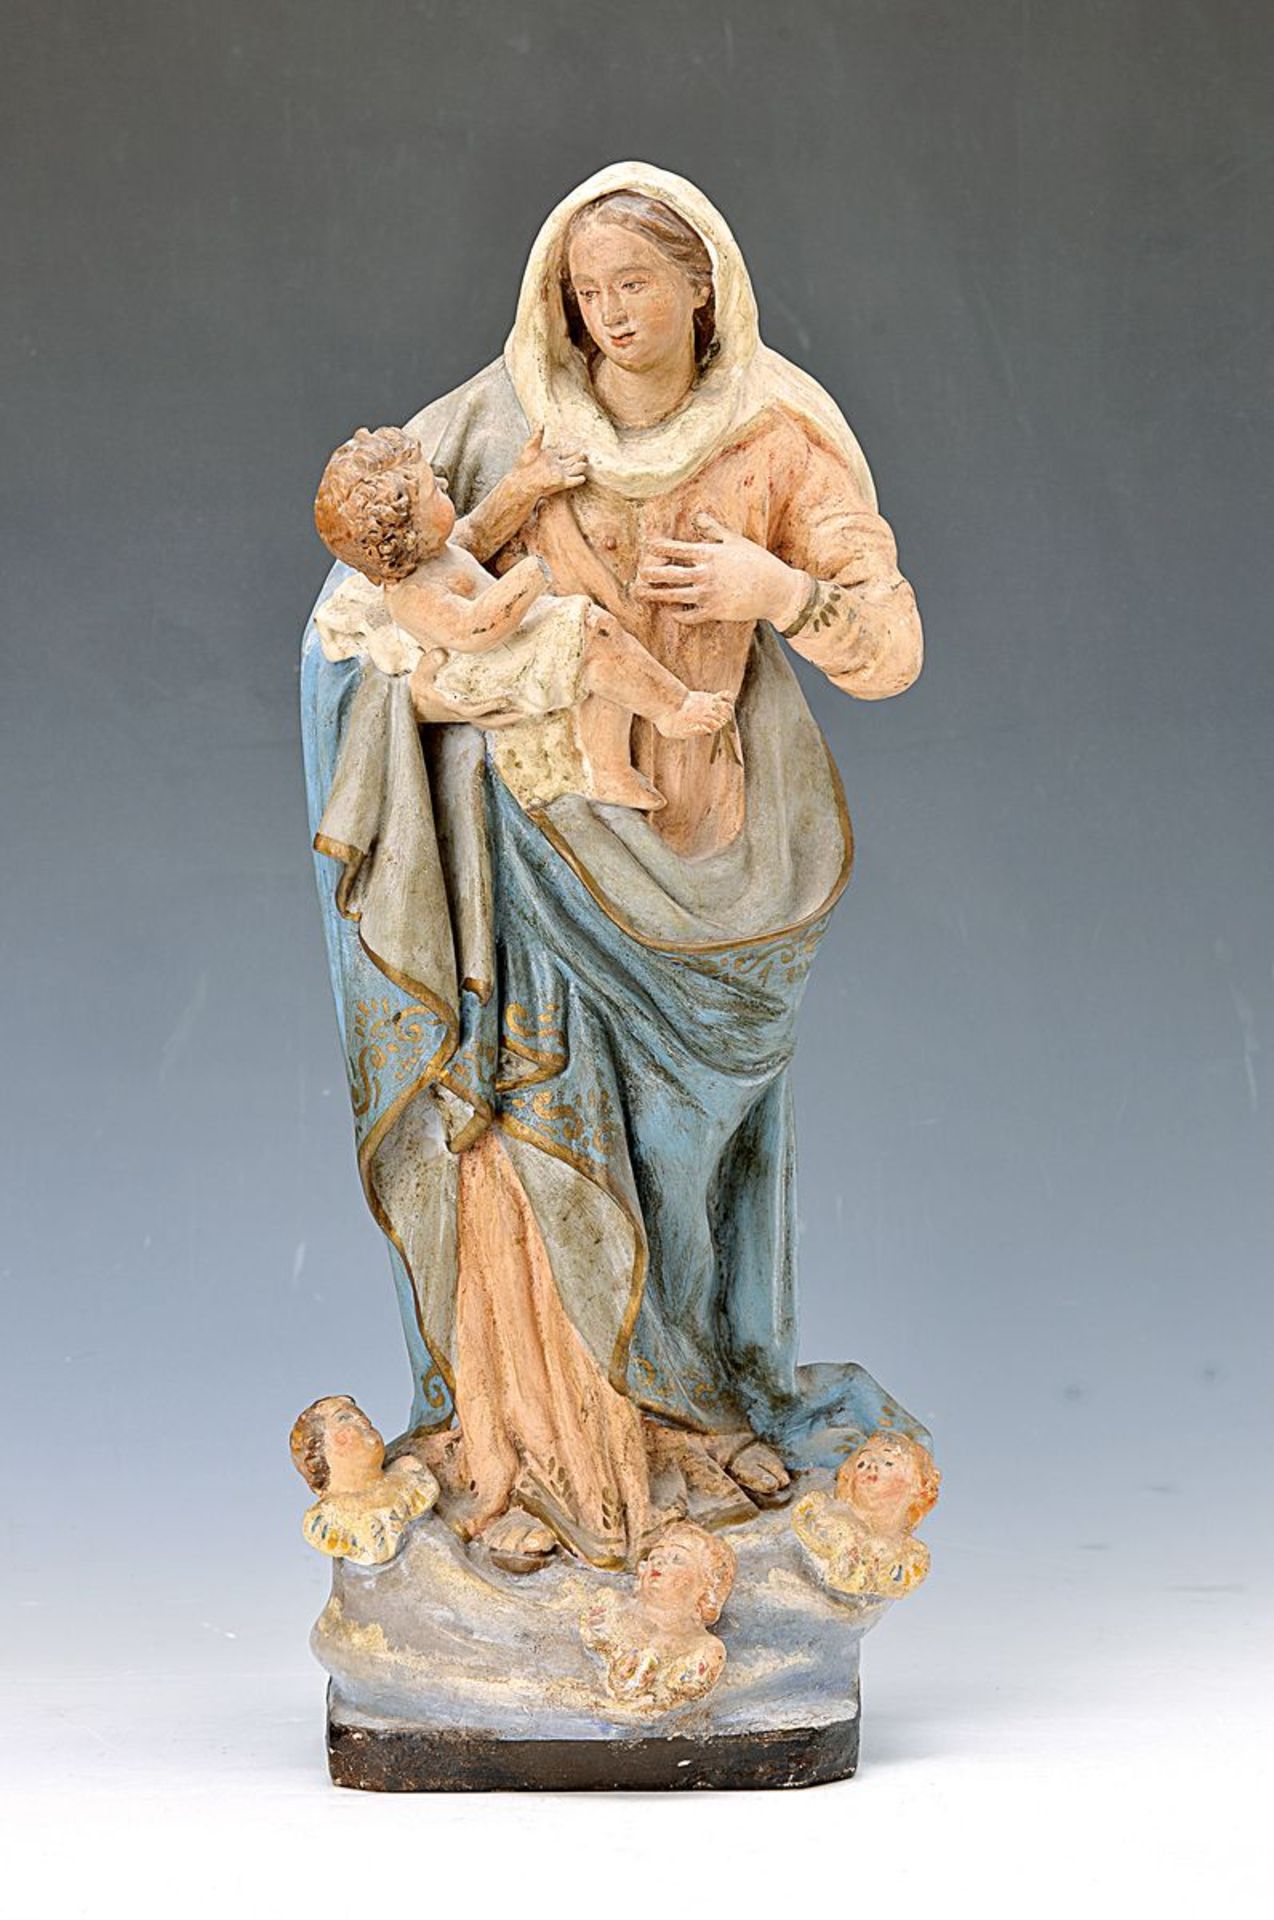 Madonna with child, Southern Germany, around 1880, wood/mass, polychrome painted, on pedestal with